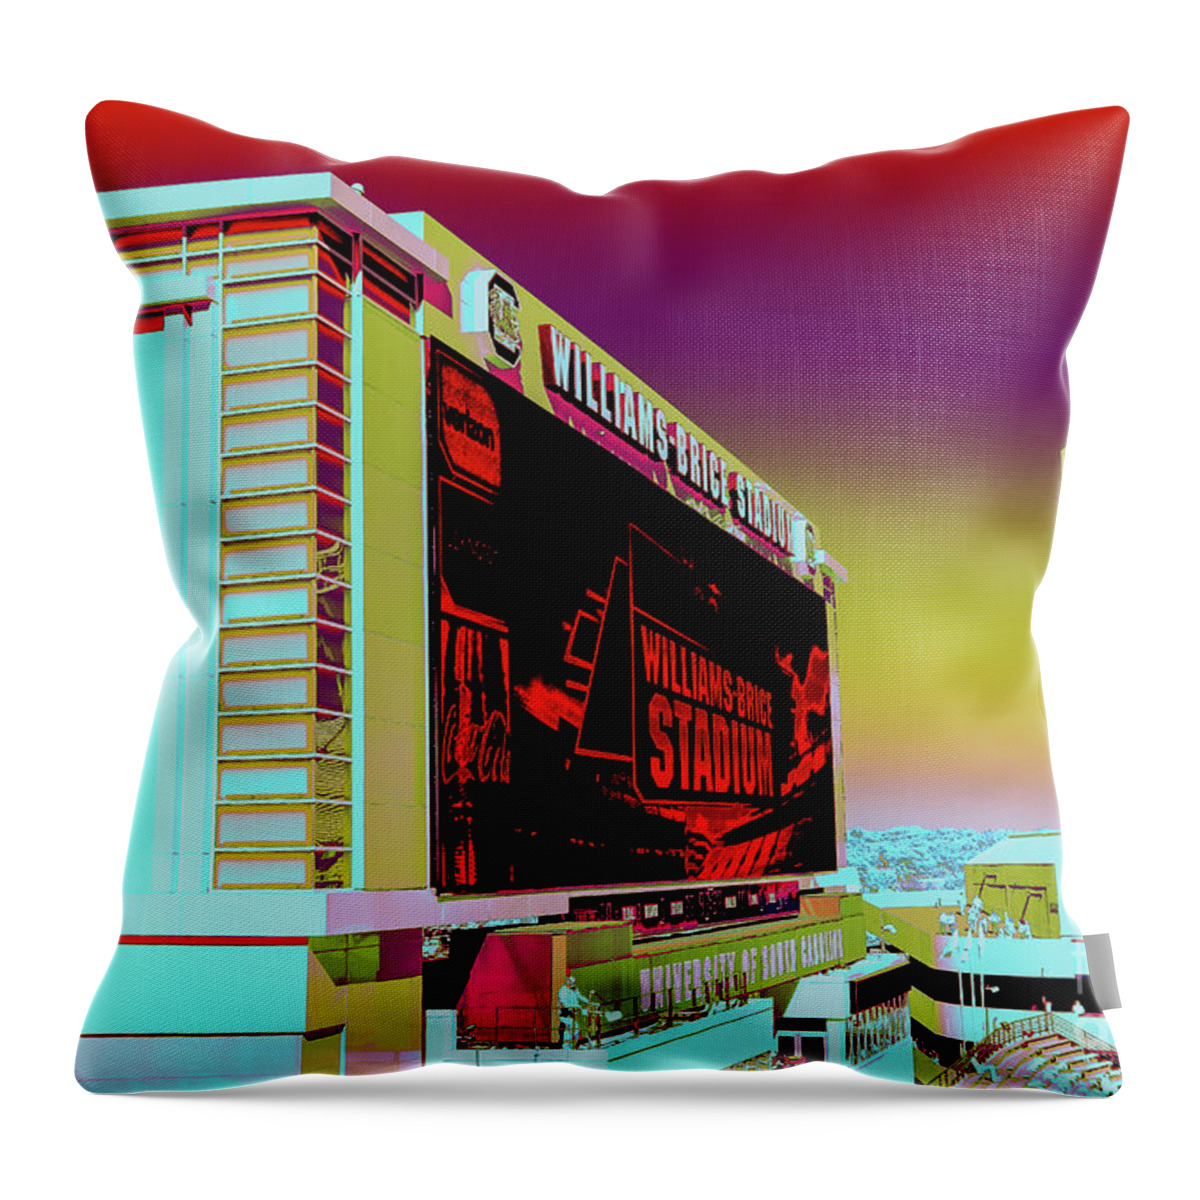 Usc Throw Pillow featuring the photograph Williams - Brice Stadium #24 by Charles Hite